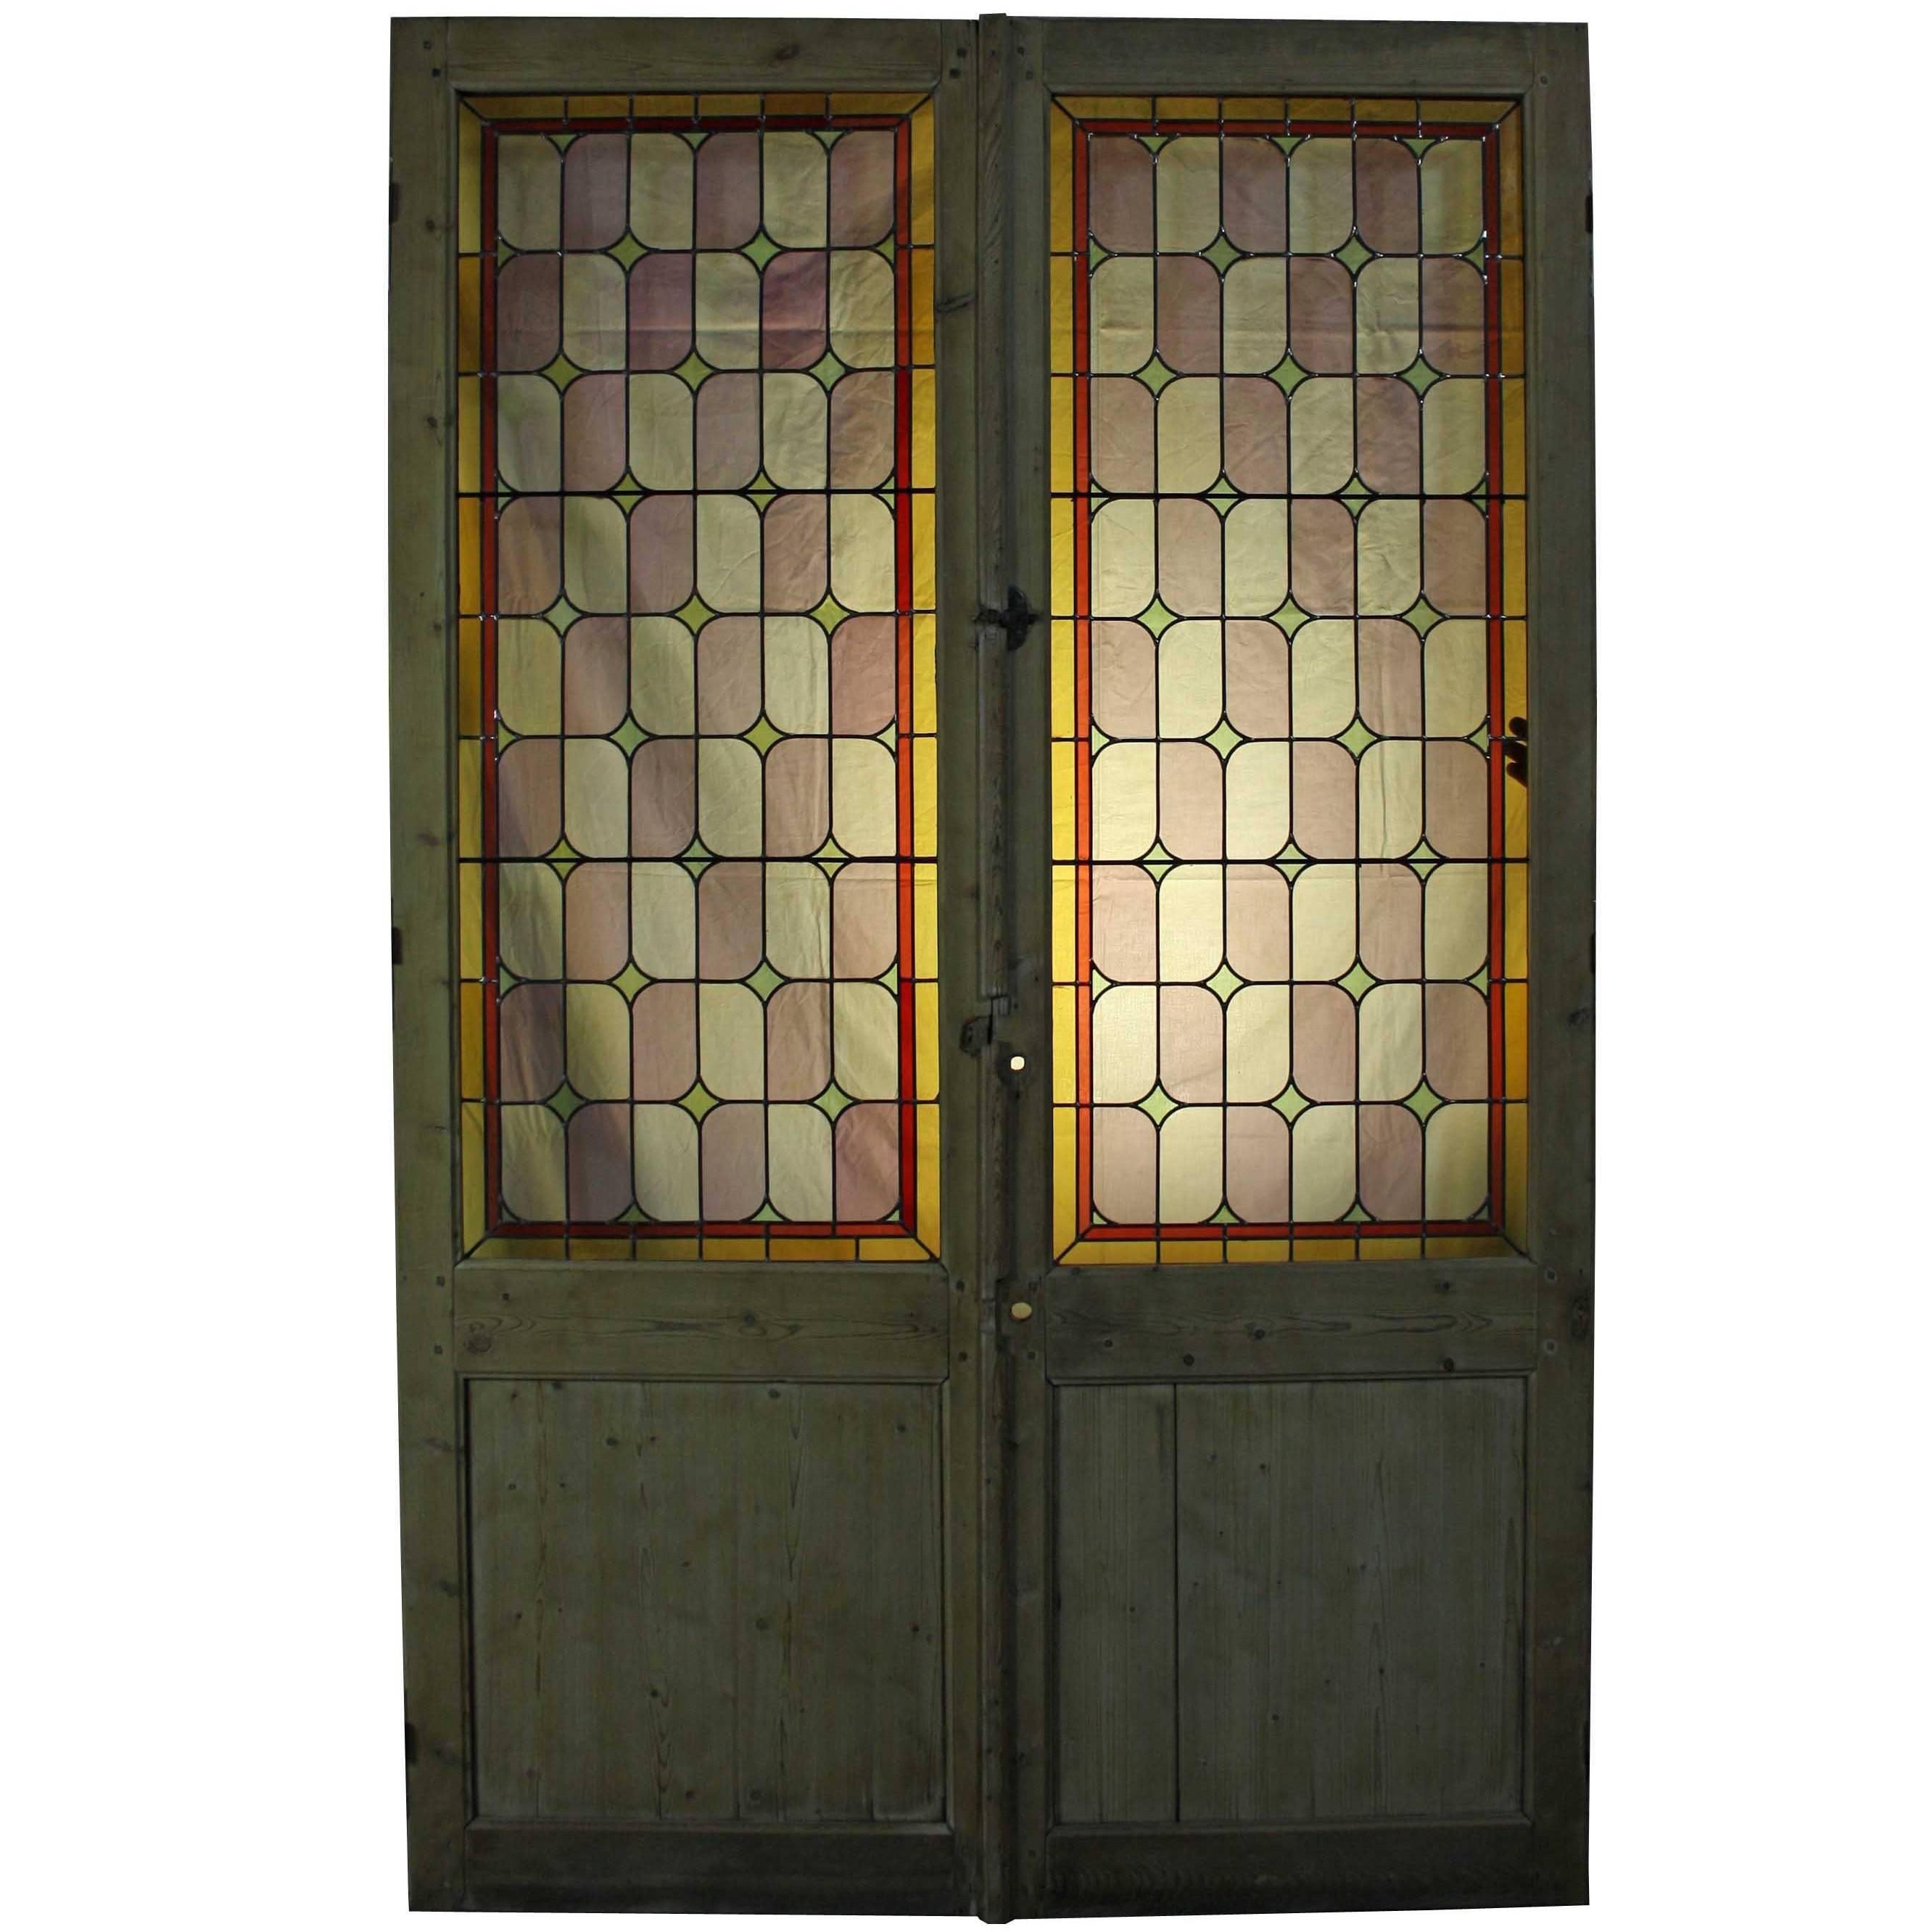 Pair of Stained Glass Double Doors or Room Dividers, circa 1900